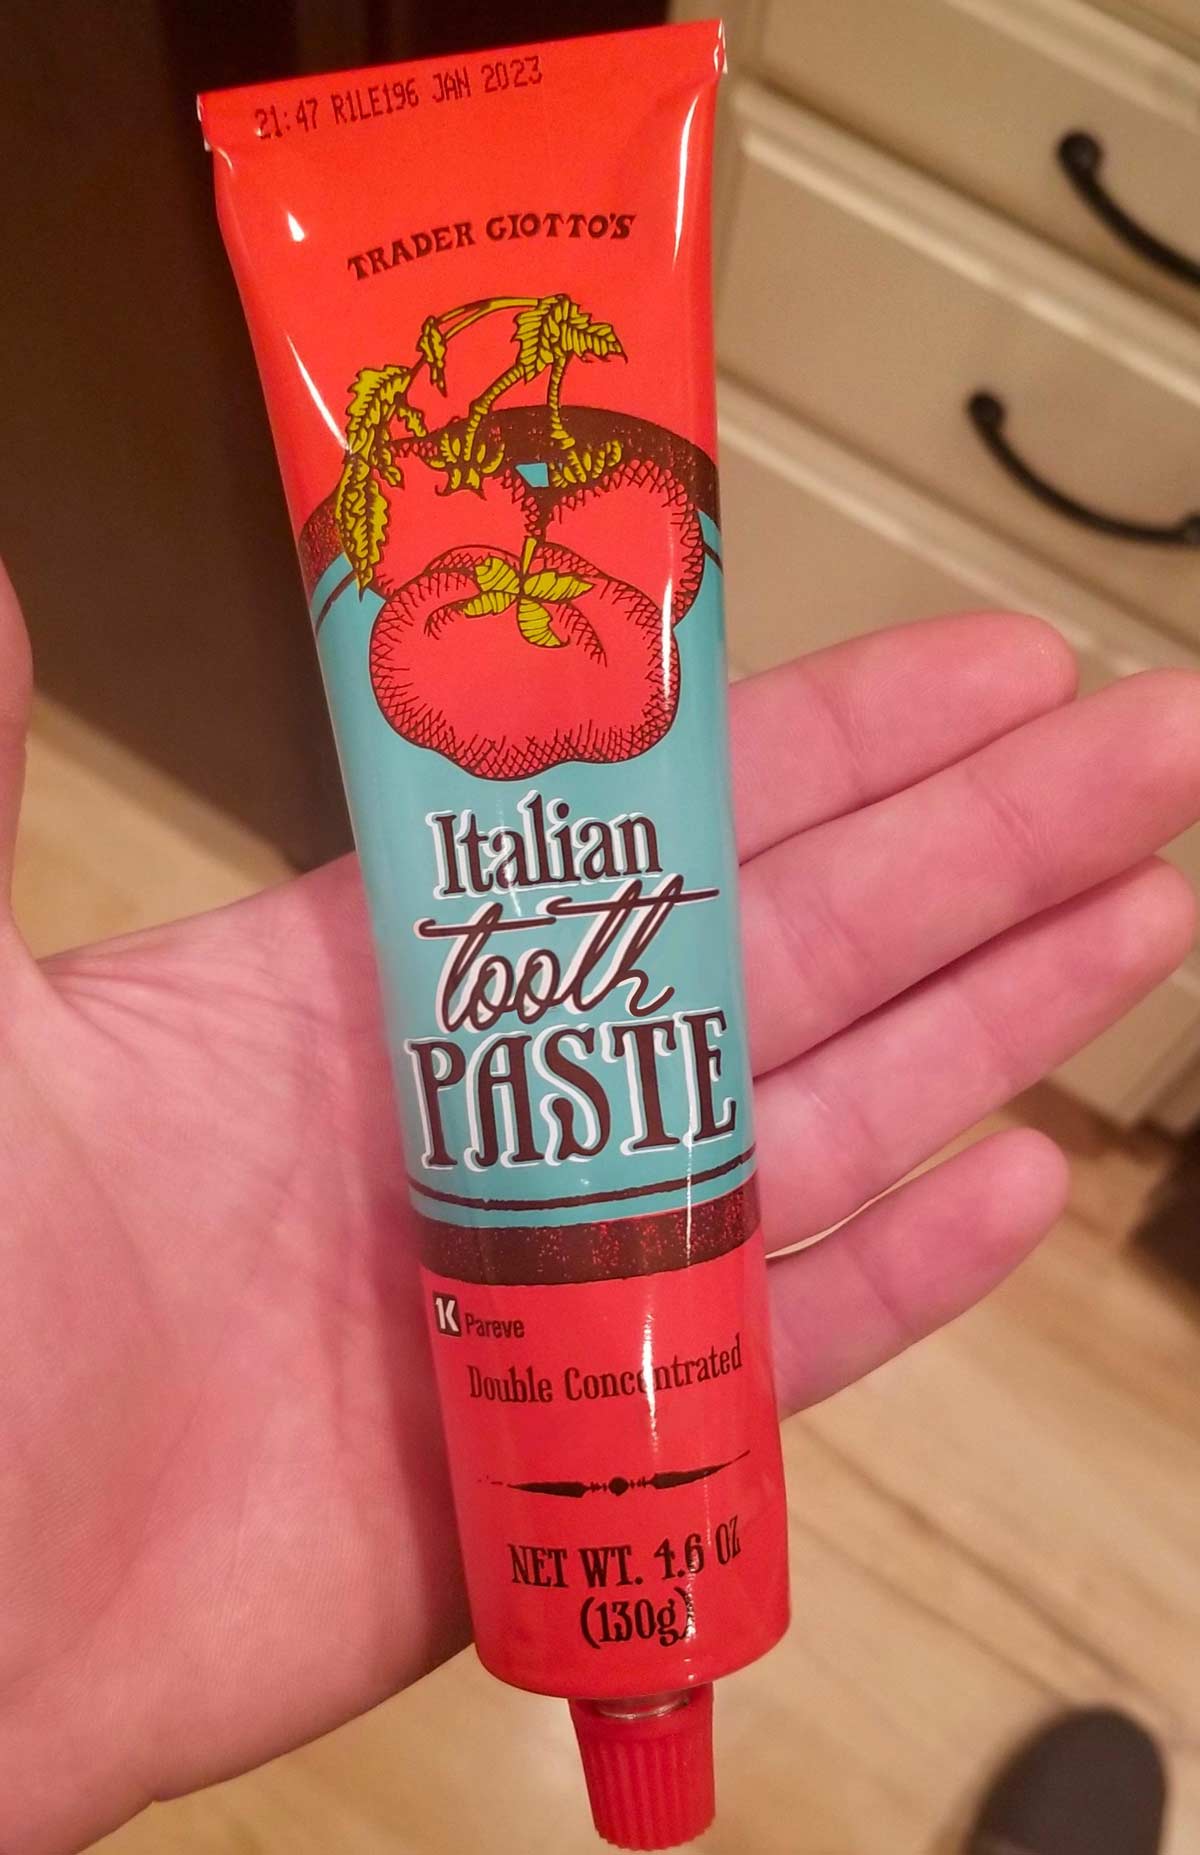 Stayed at my very Italian cousin’s place. I asked to use their toothpaste and they handed me this...